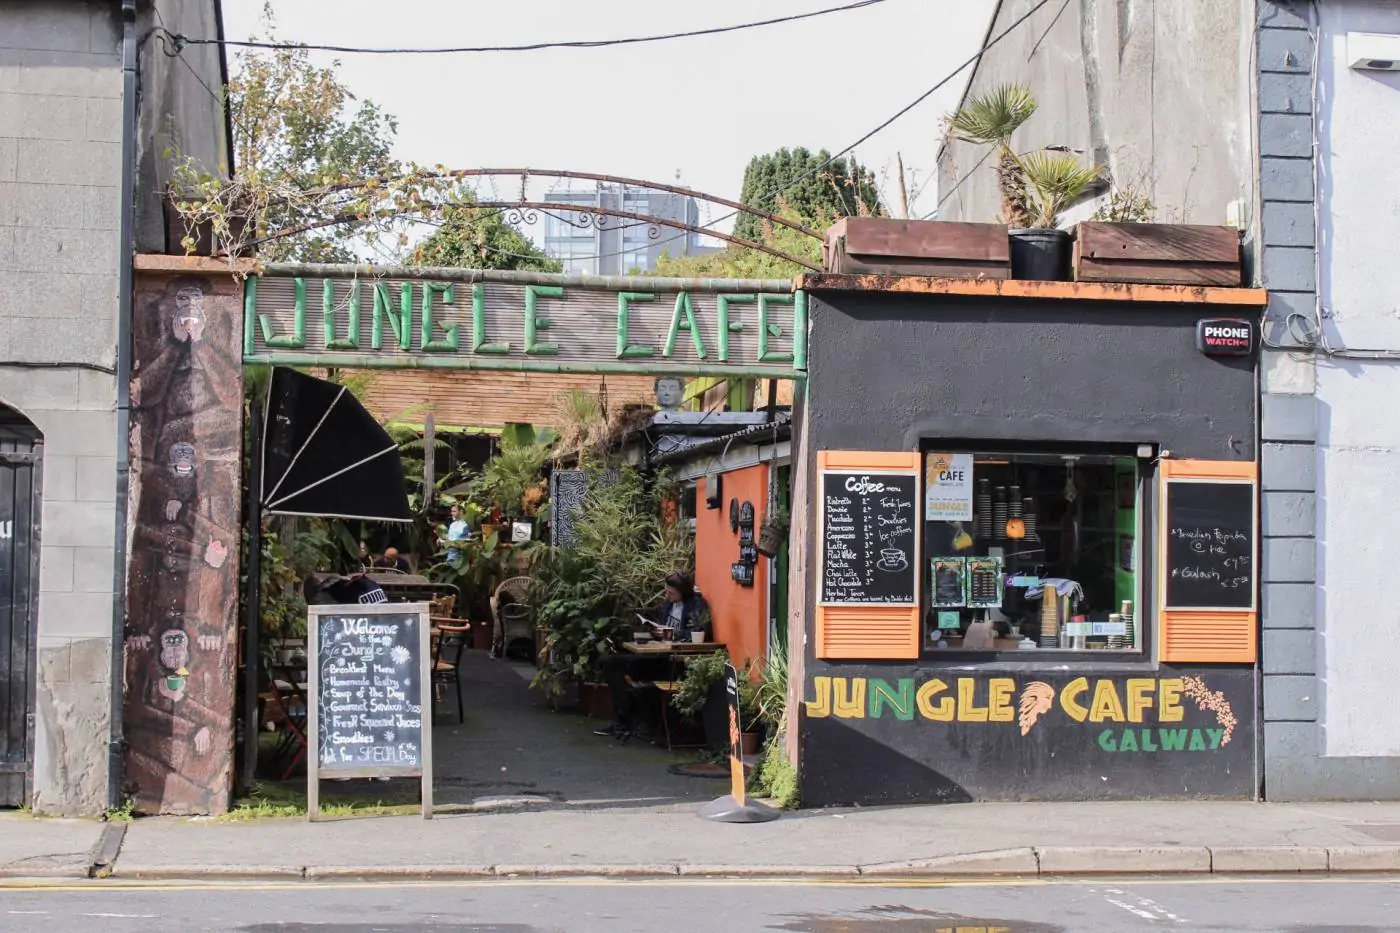 Jungle Cafe, Galway, Ireland. A great place for lunch in Galway.